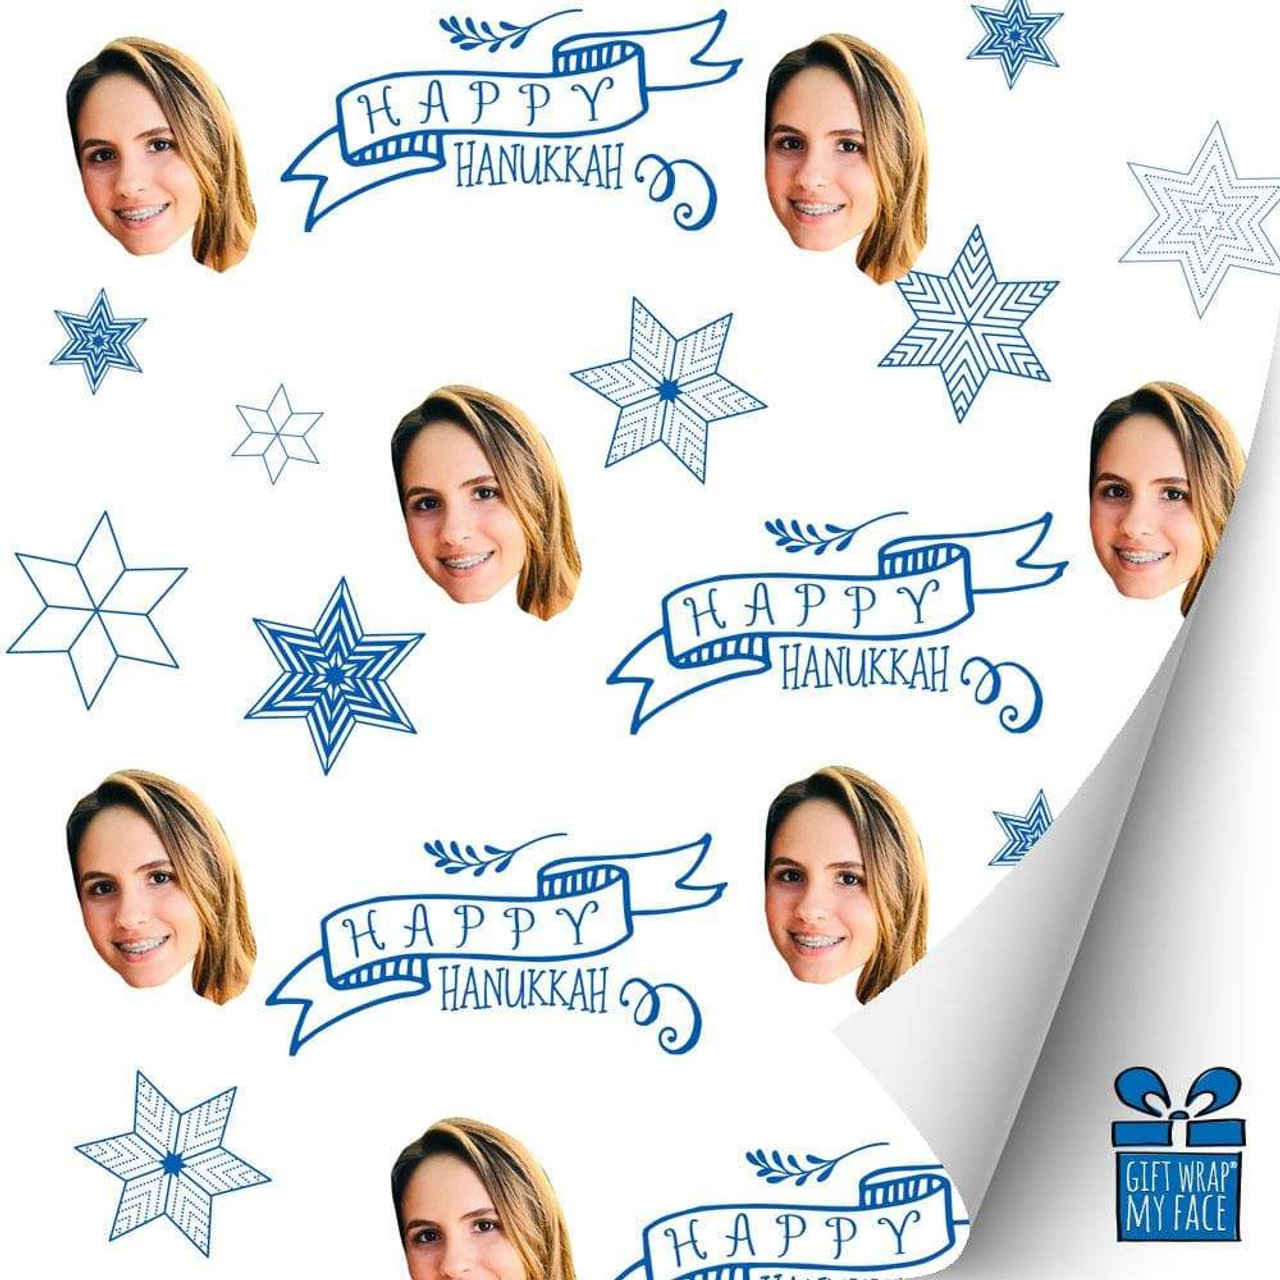 Name Hanukkah Personalized Gift Wrap, Custom Wrapping Paper for